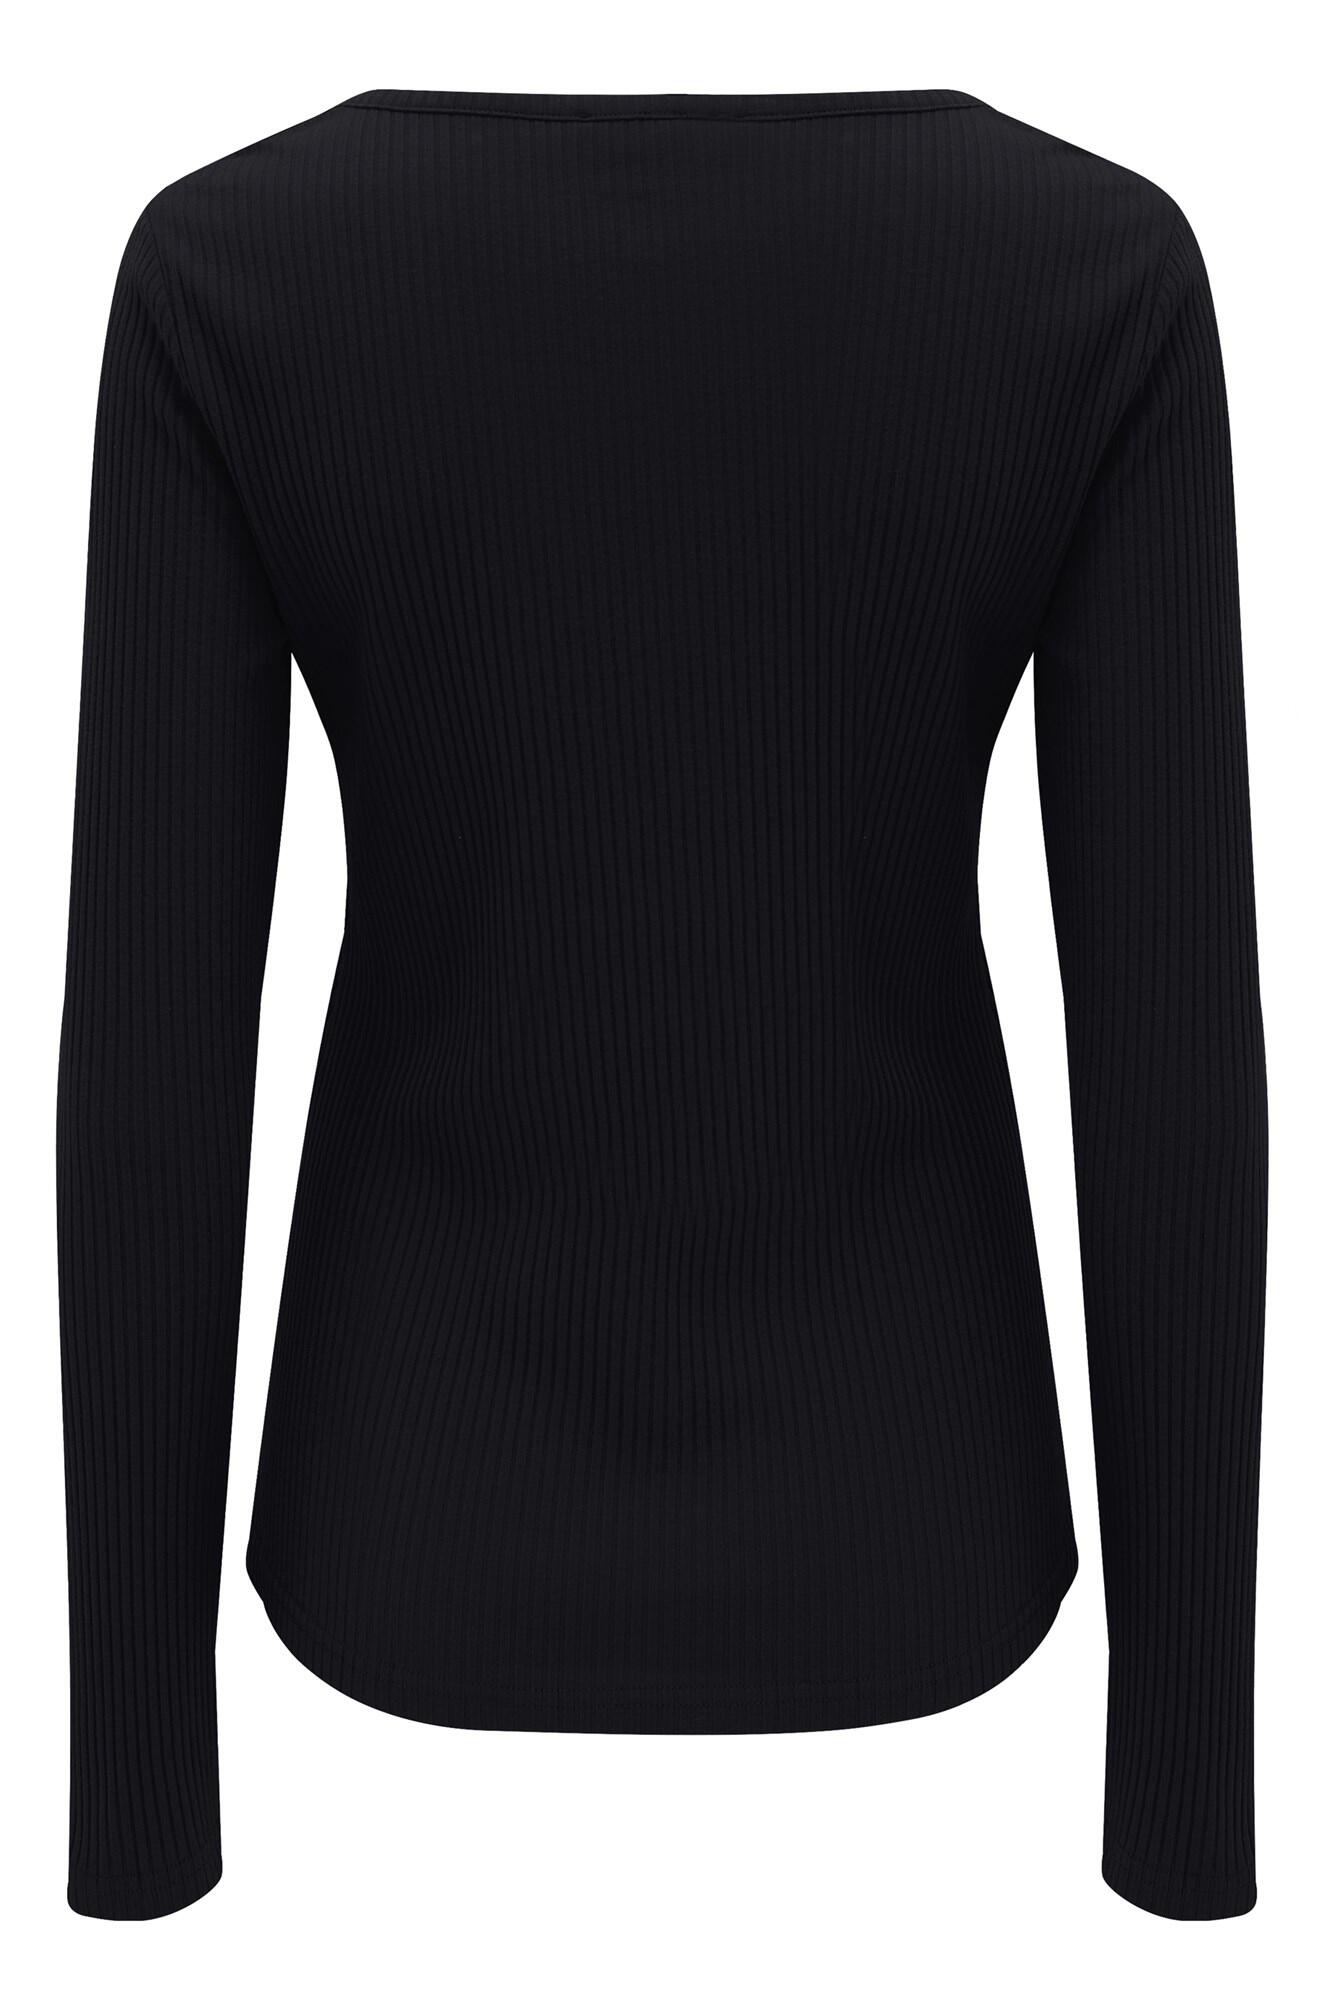 Off Duty Rib Jersey Support Cami - Black